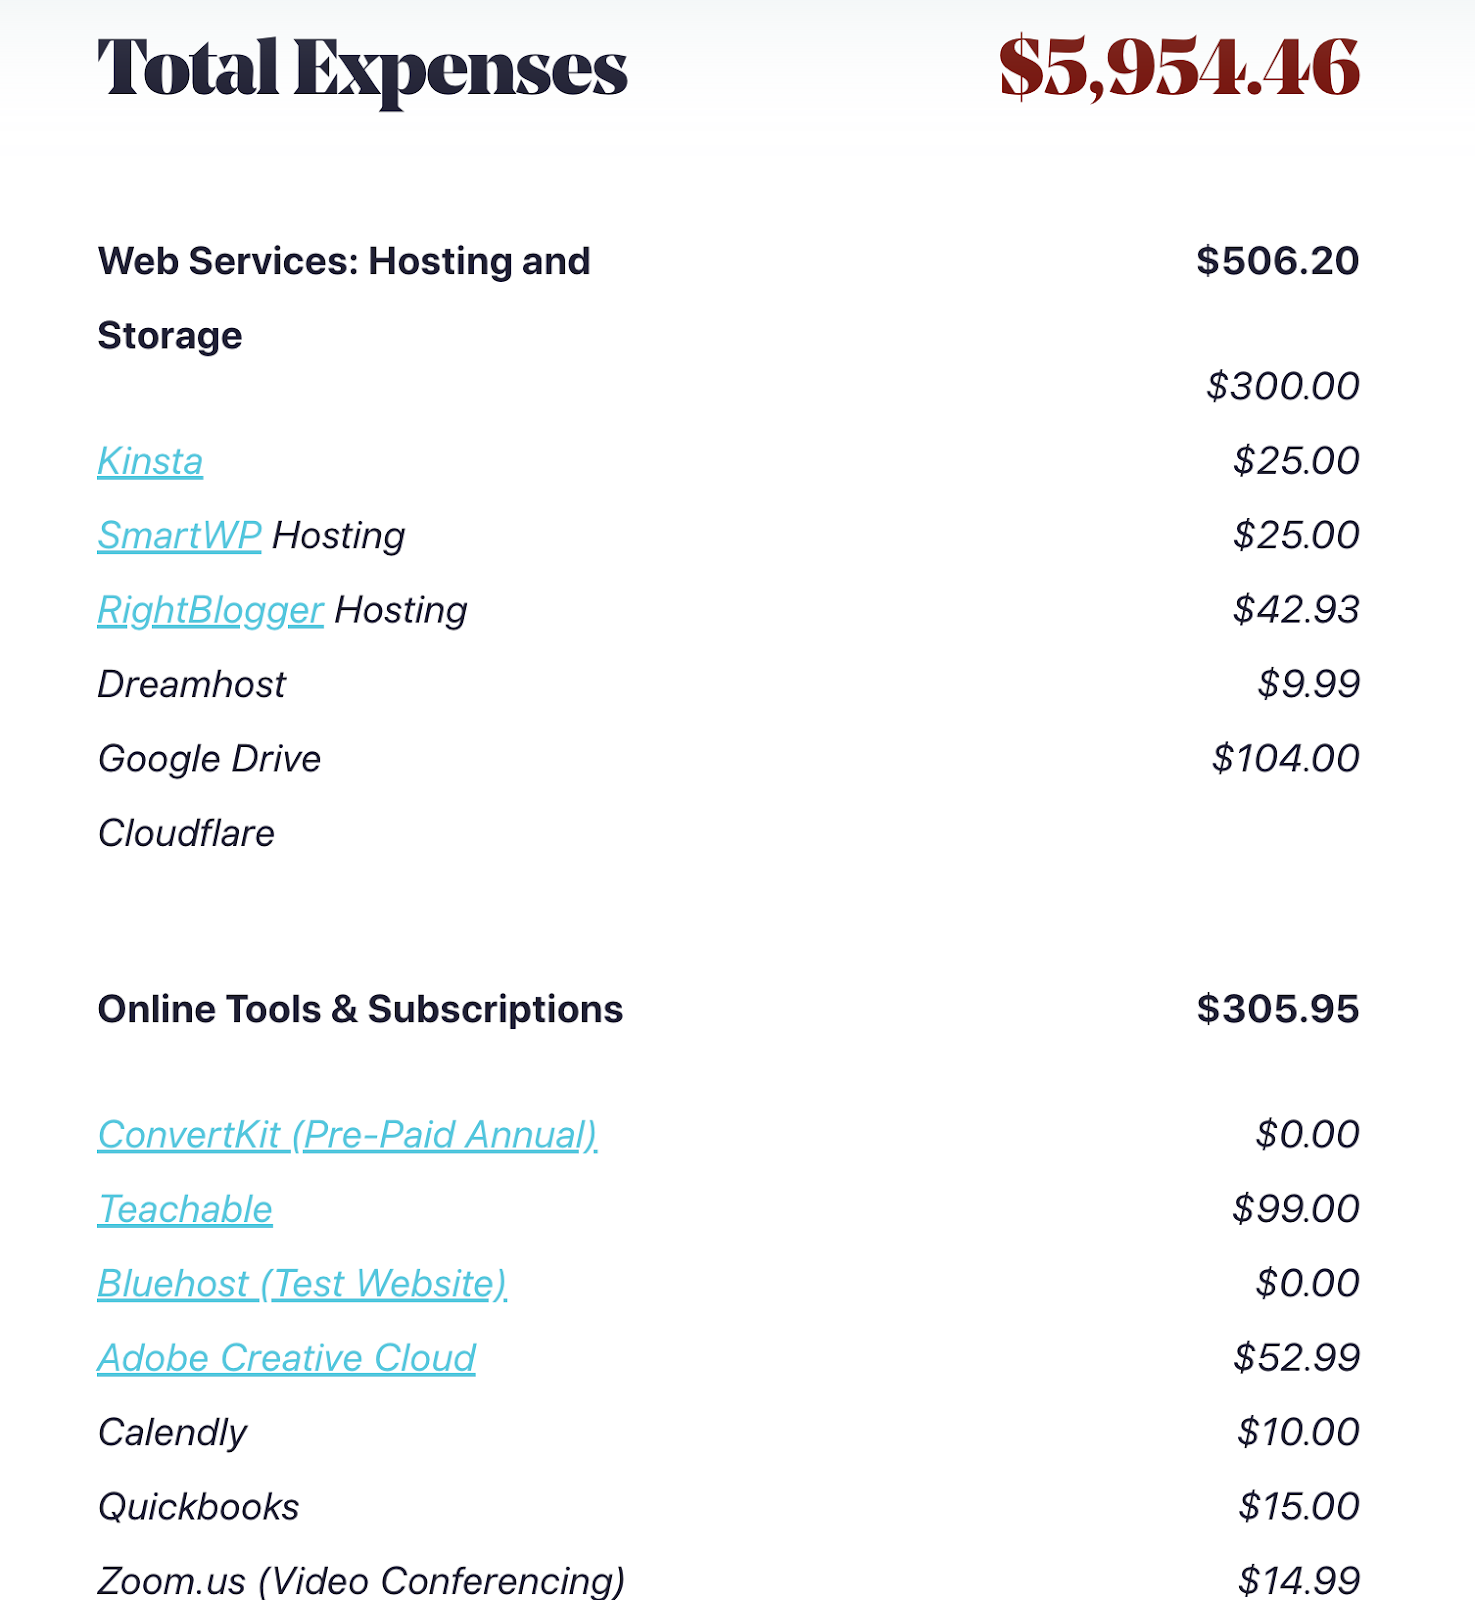 Screenshot of Blog Expenses to Demonstrate Financial Management as a Blogging Skill